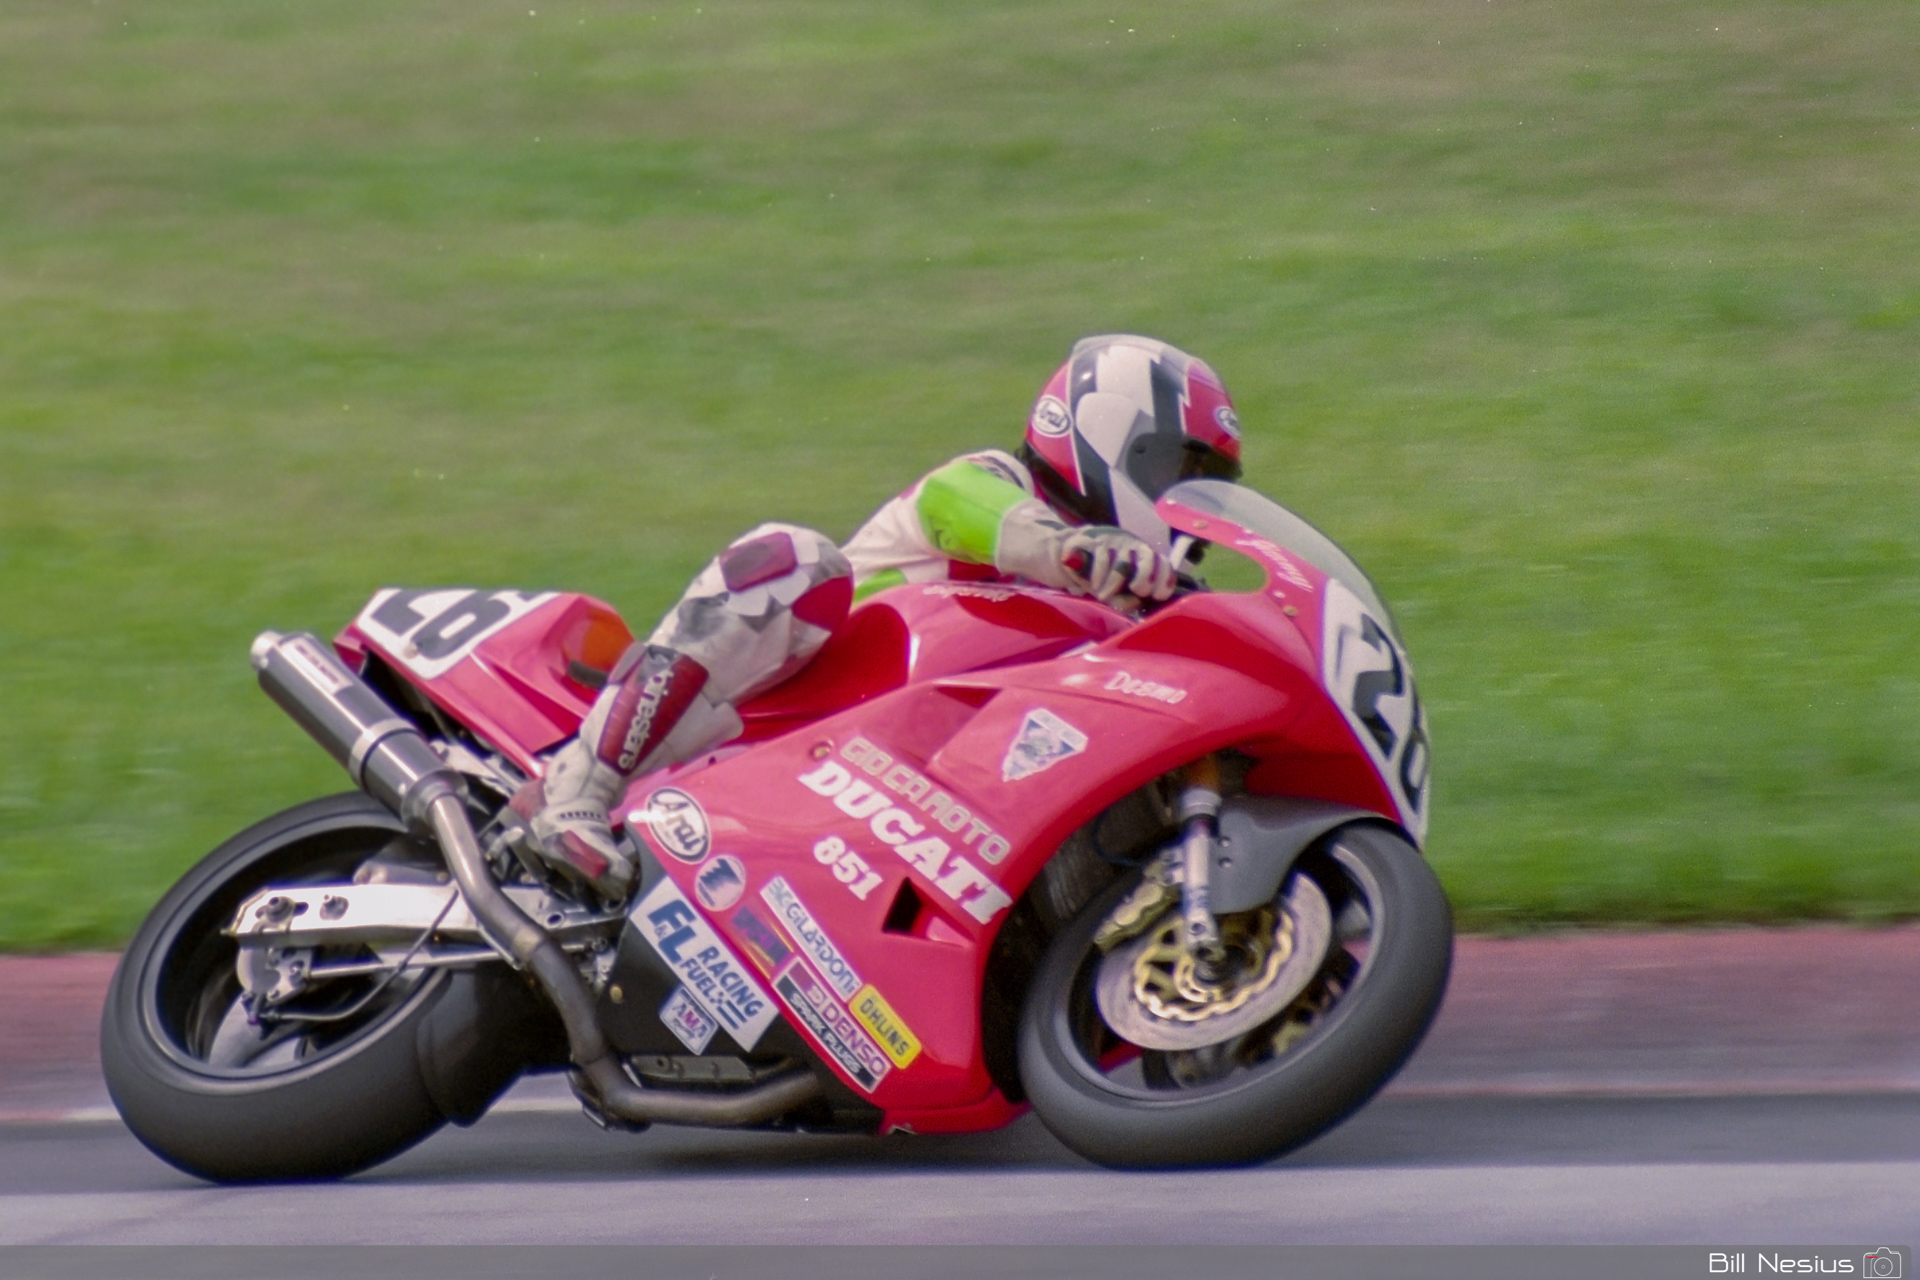 Jimmy Adamo on a the Number 26 Ducati 851 / FLM_7751 / 3